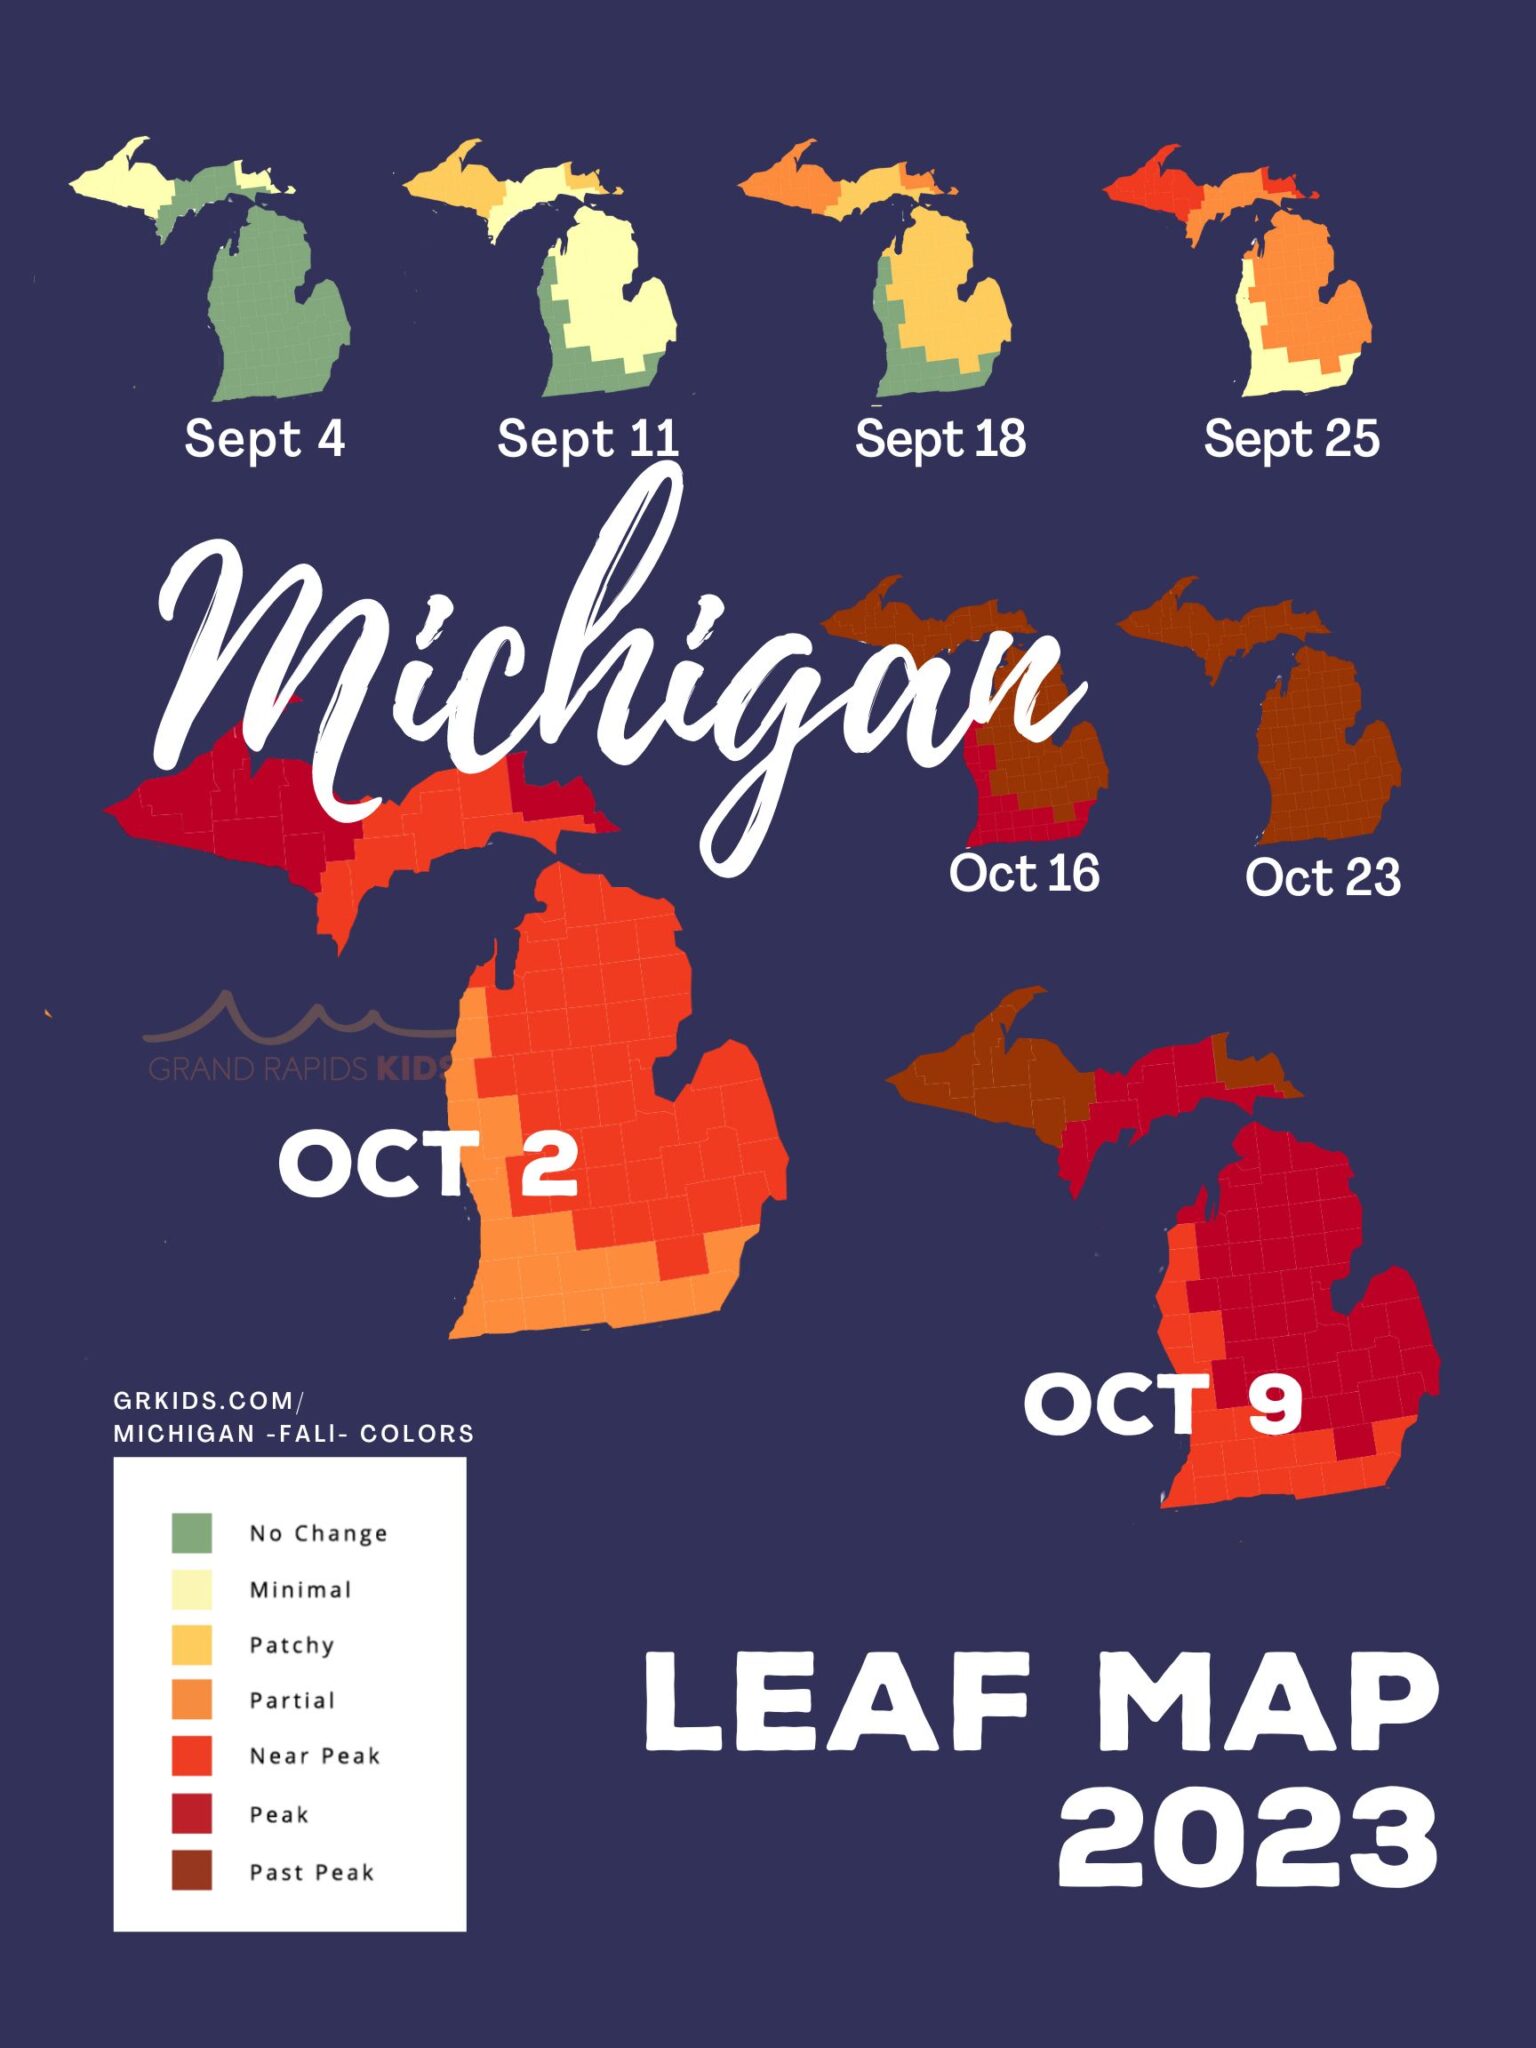 Michigan Fall Colors 2023 10 Delightful Ways to Make the Most of Fall